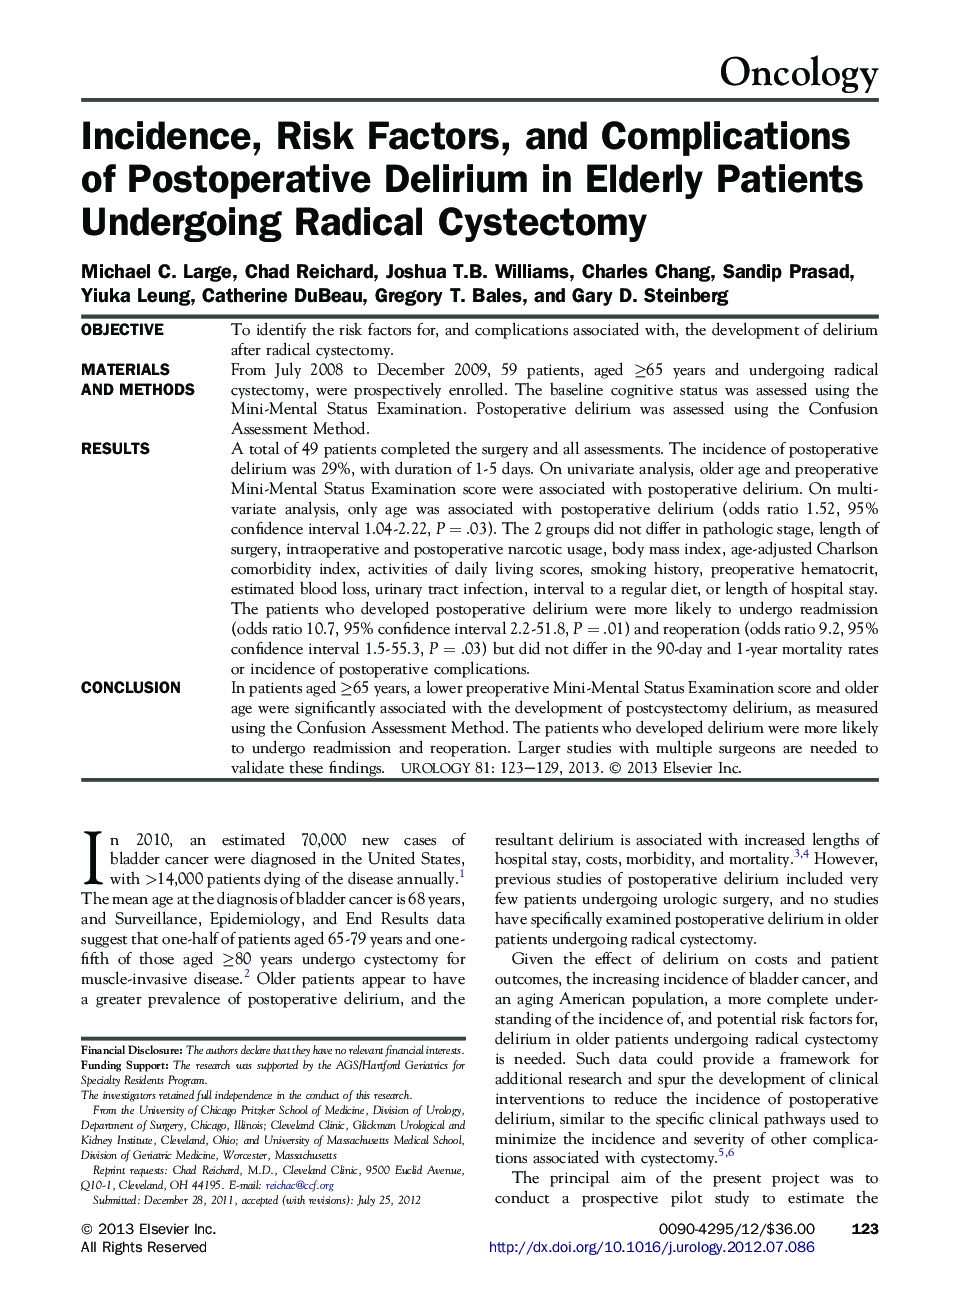 Incidence, Risk Factors, and Complications of Postoperative Delirium in Elderly Patients Undergoing Radical Cystectomy 